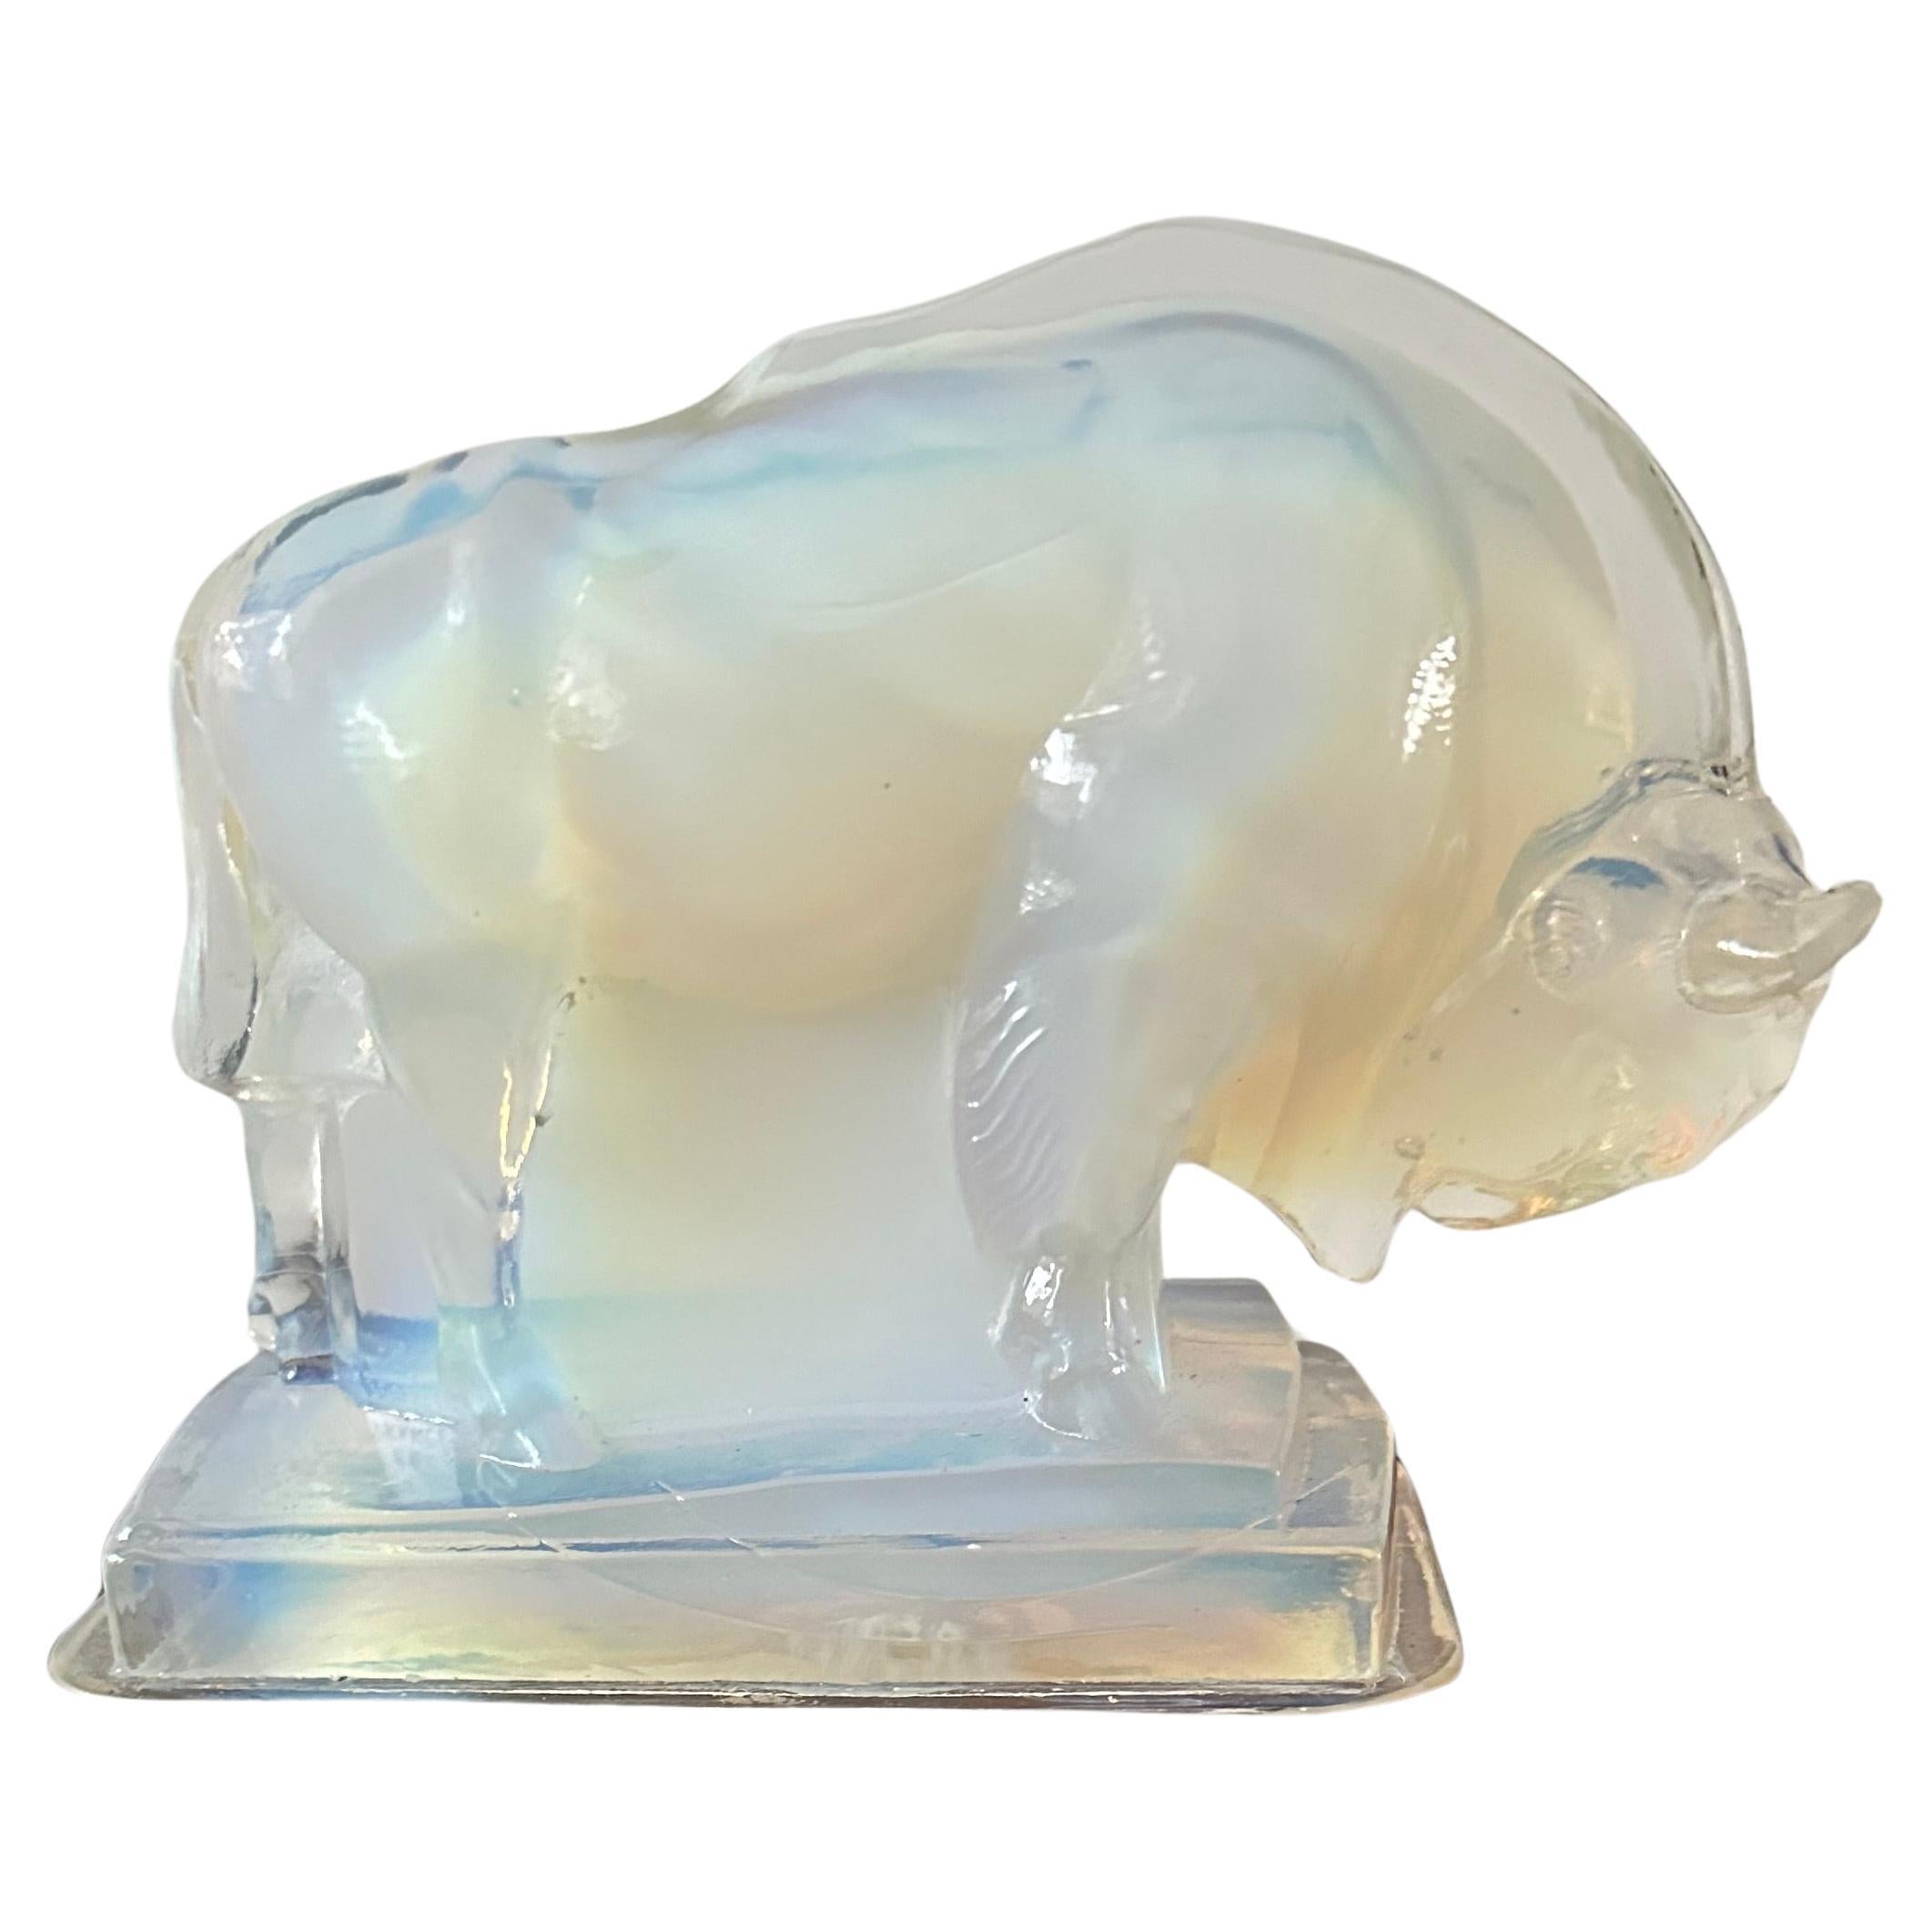 French Art Deco Opalescent Glass Table or Desk Lamp with Stylish Bison Sculpture